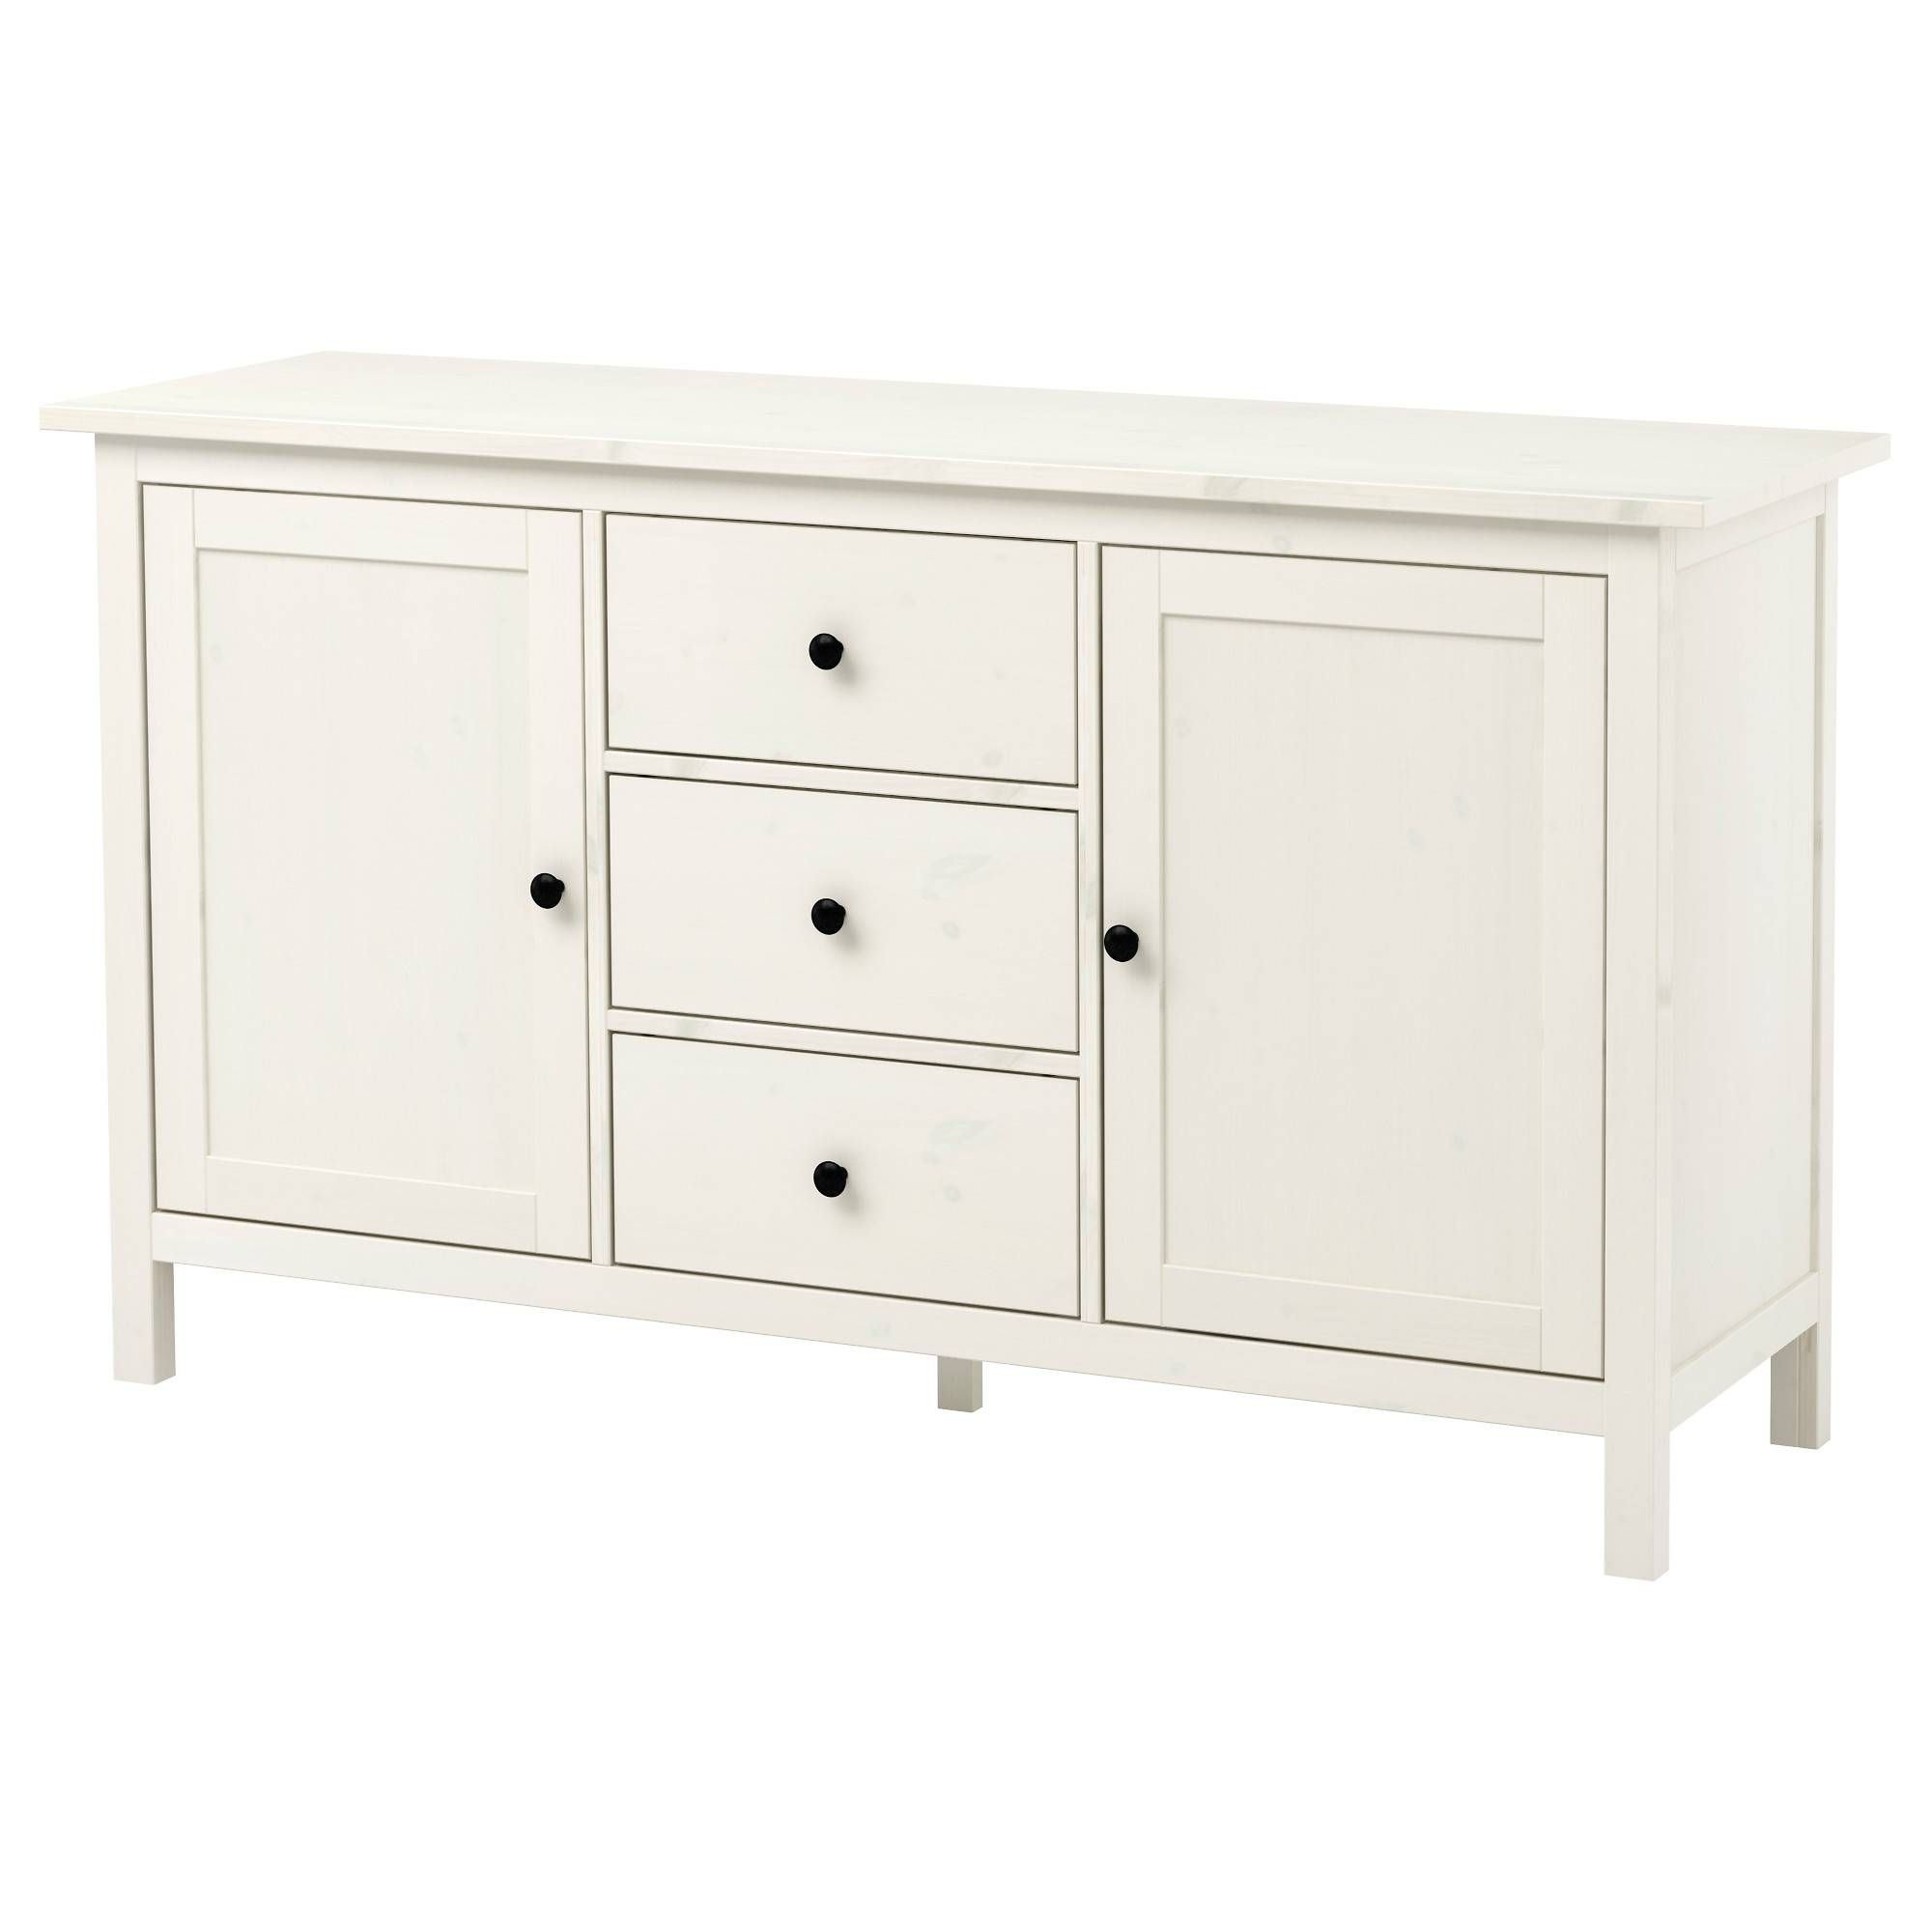 Hemnes Sideboard – White Stain – Ikea Inside Small White Sideboards (View 5 of 15)